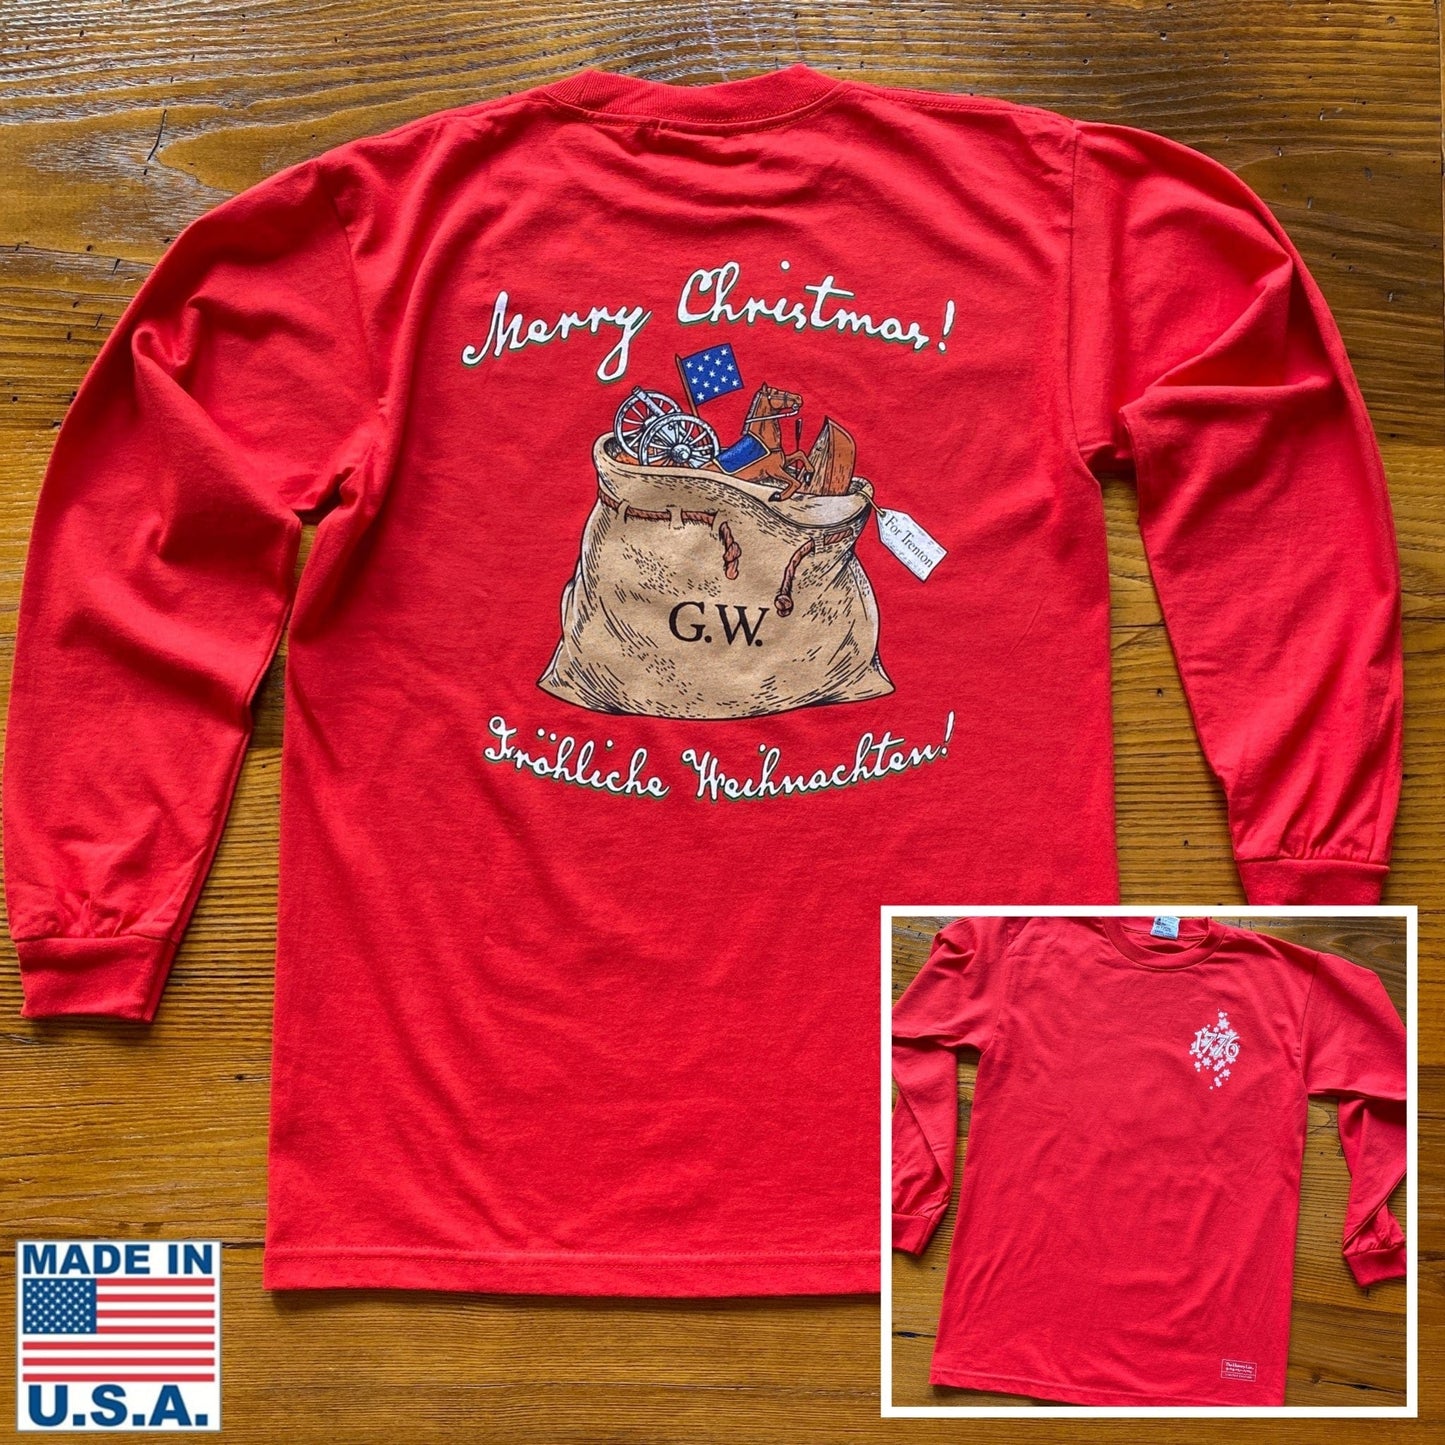 George Washington's Christmas Day Crossing of the Delaware Made in America Long-sleeved shirt — The Christmas shirt for history nerds